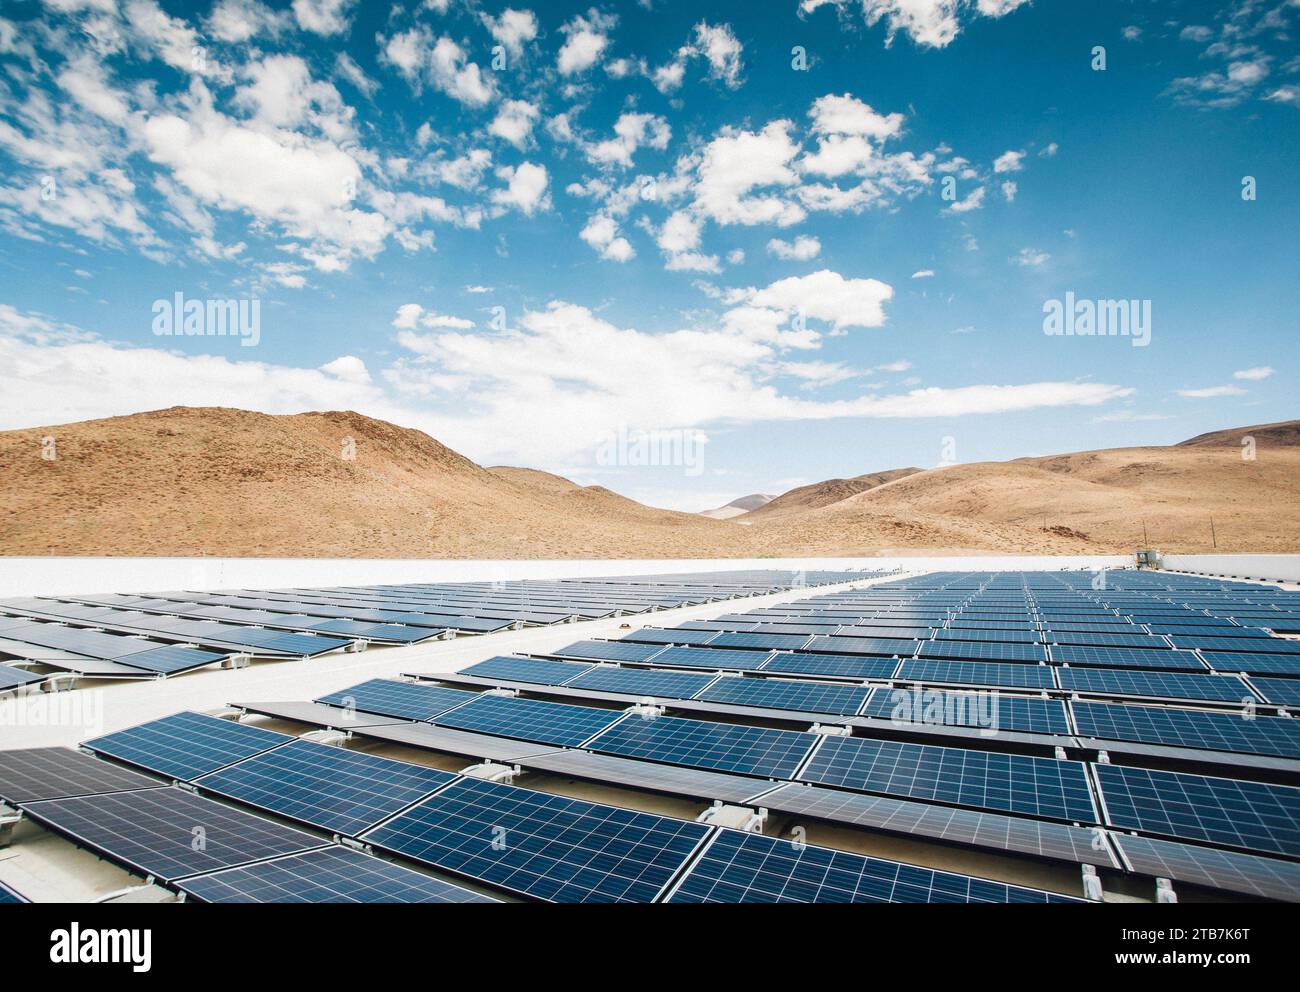 United Stated, Nevada, Tahoe Reno Industrial Center: photovoltaic panels on the roofs of the Giga Nevada (Gigafactory 1), a lithium-ion battery and el Stock Photo